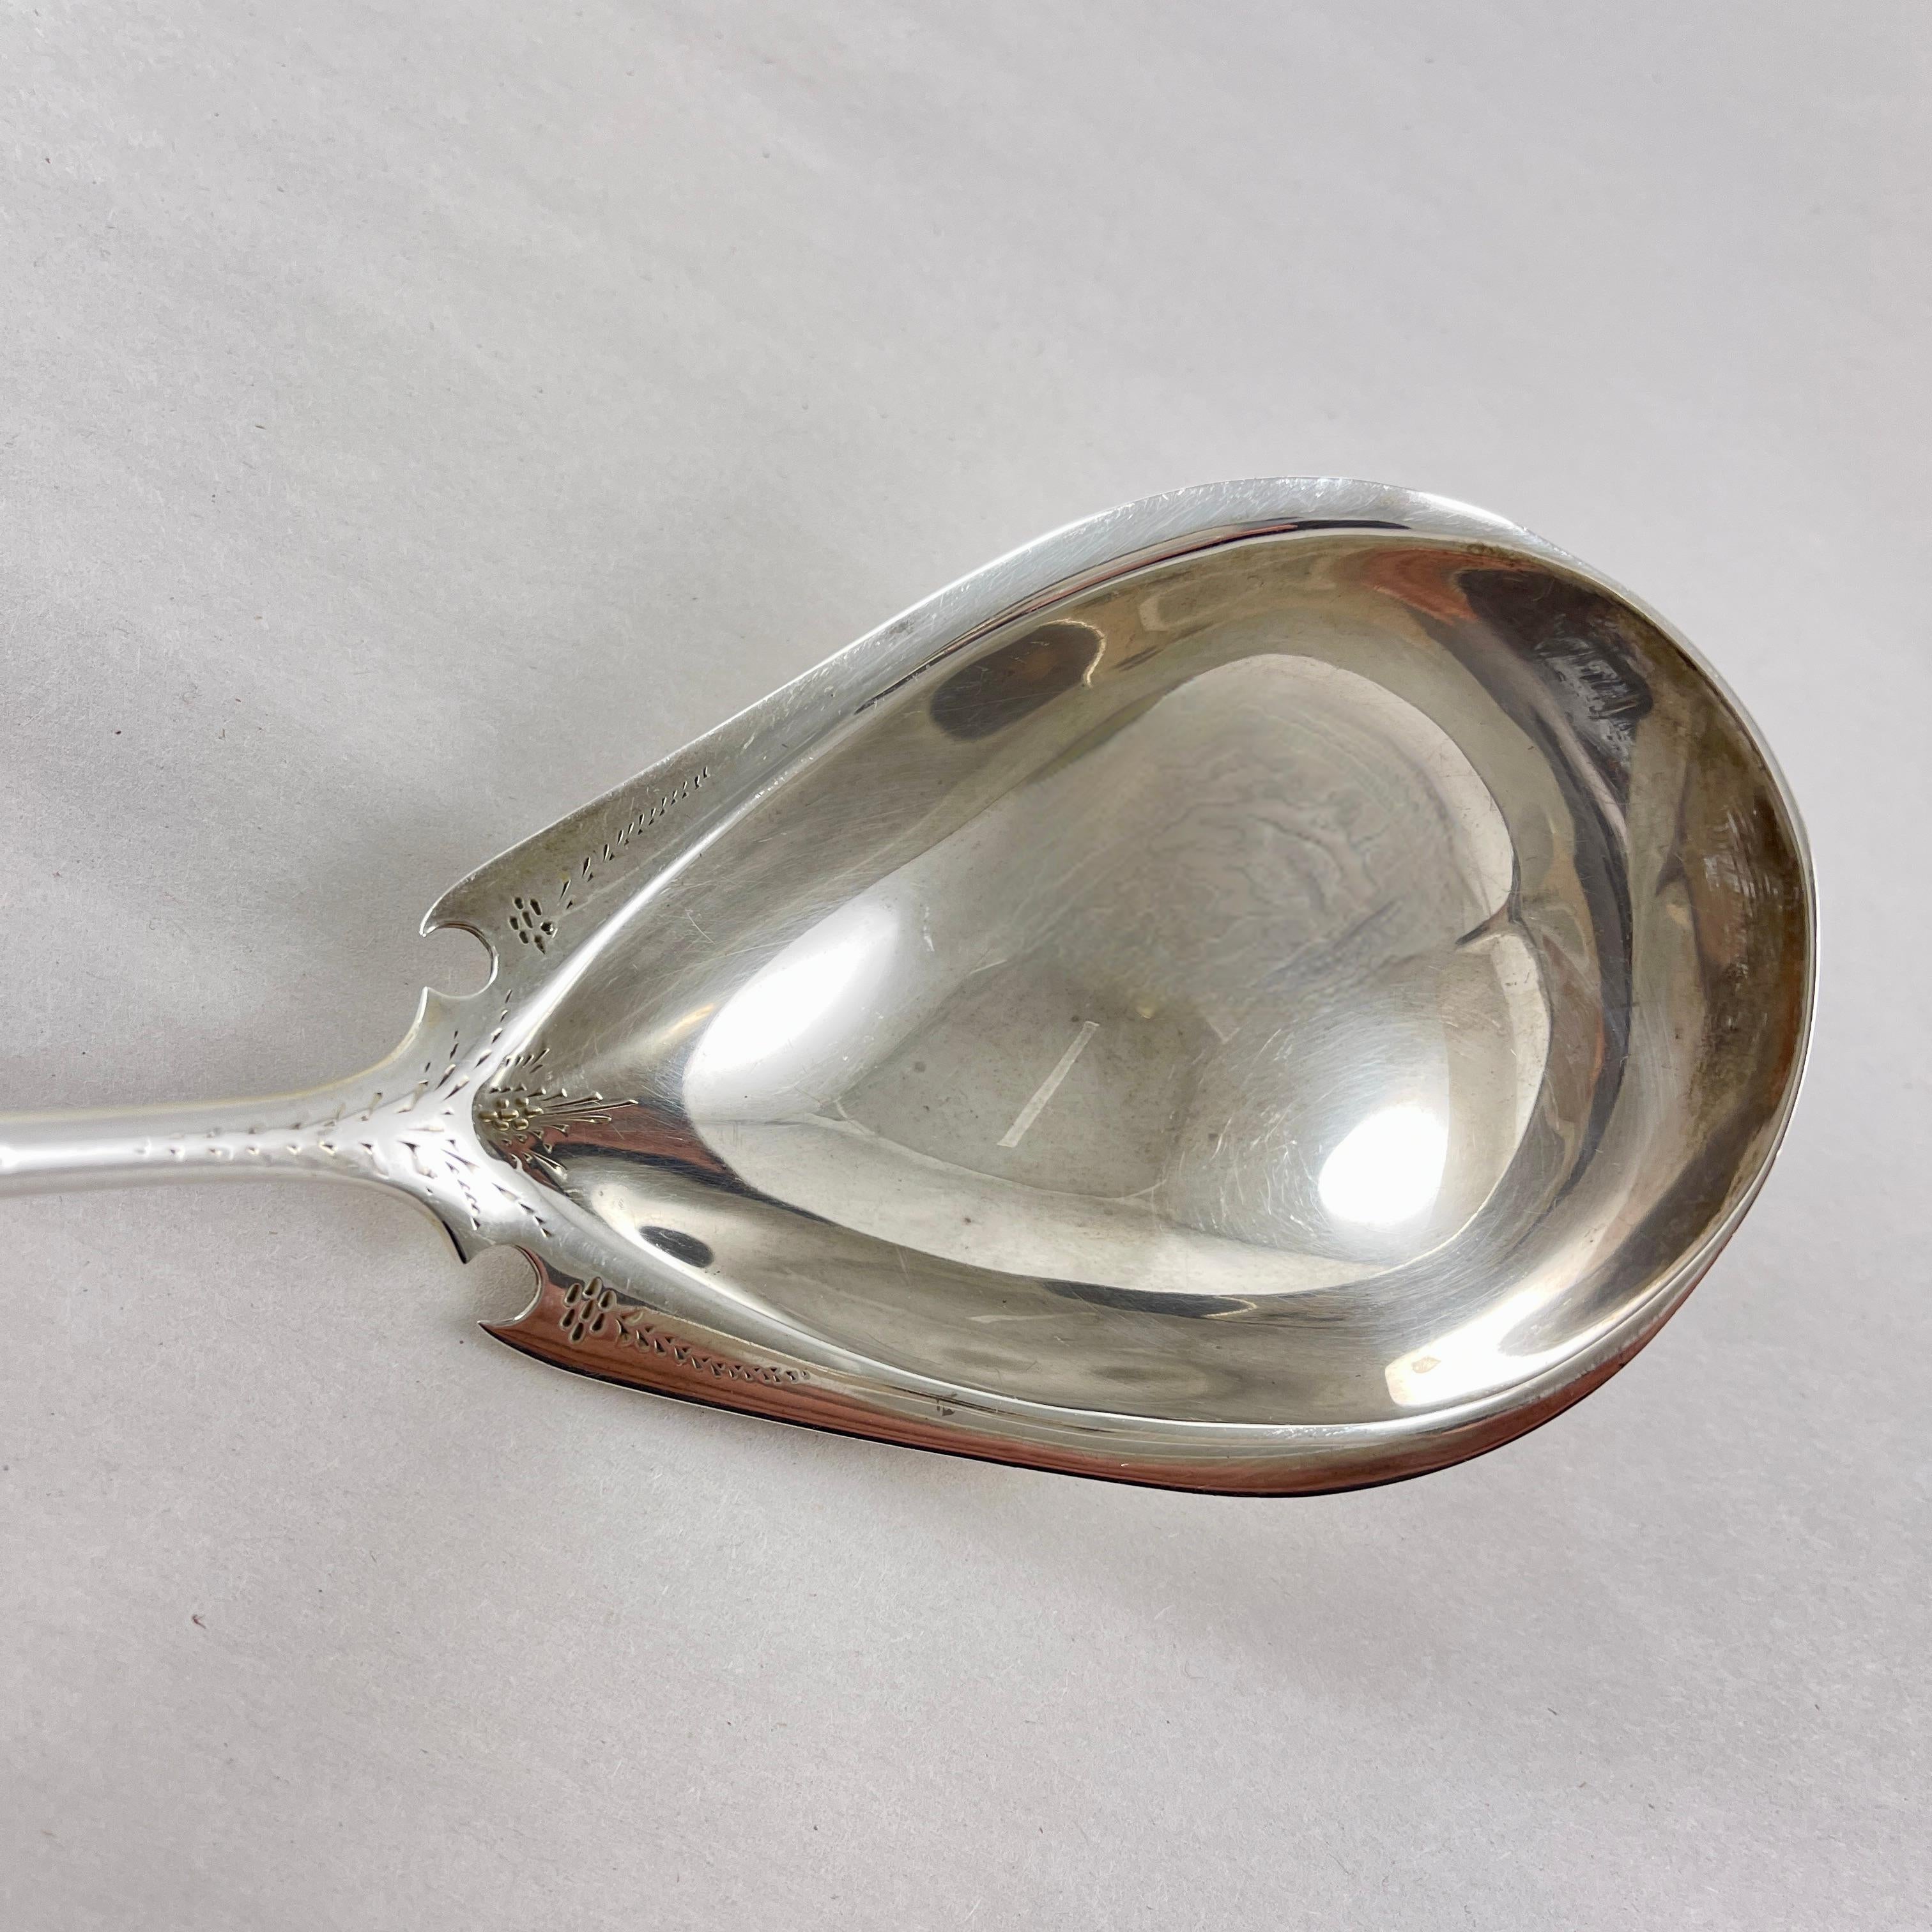 Bailey & Co. Estate Sterling Silver Hand Made Ladle, circa 1850 For Sale 1